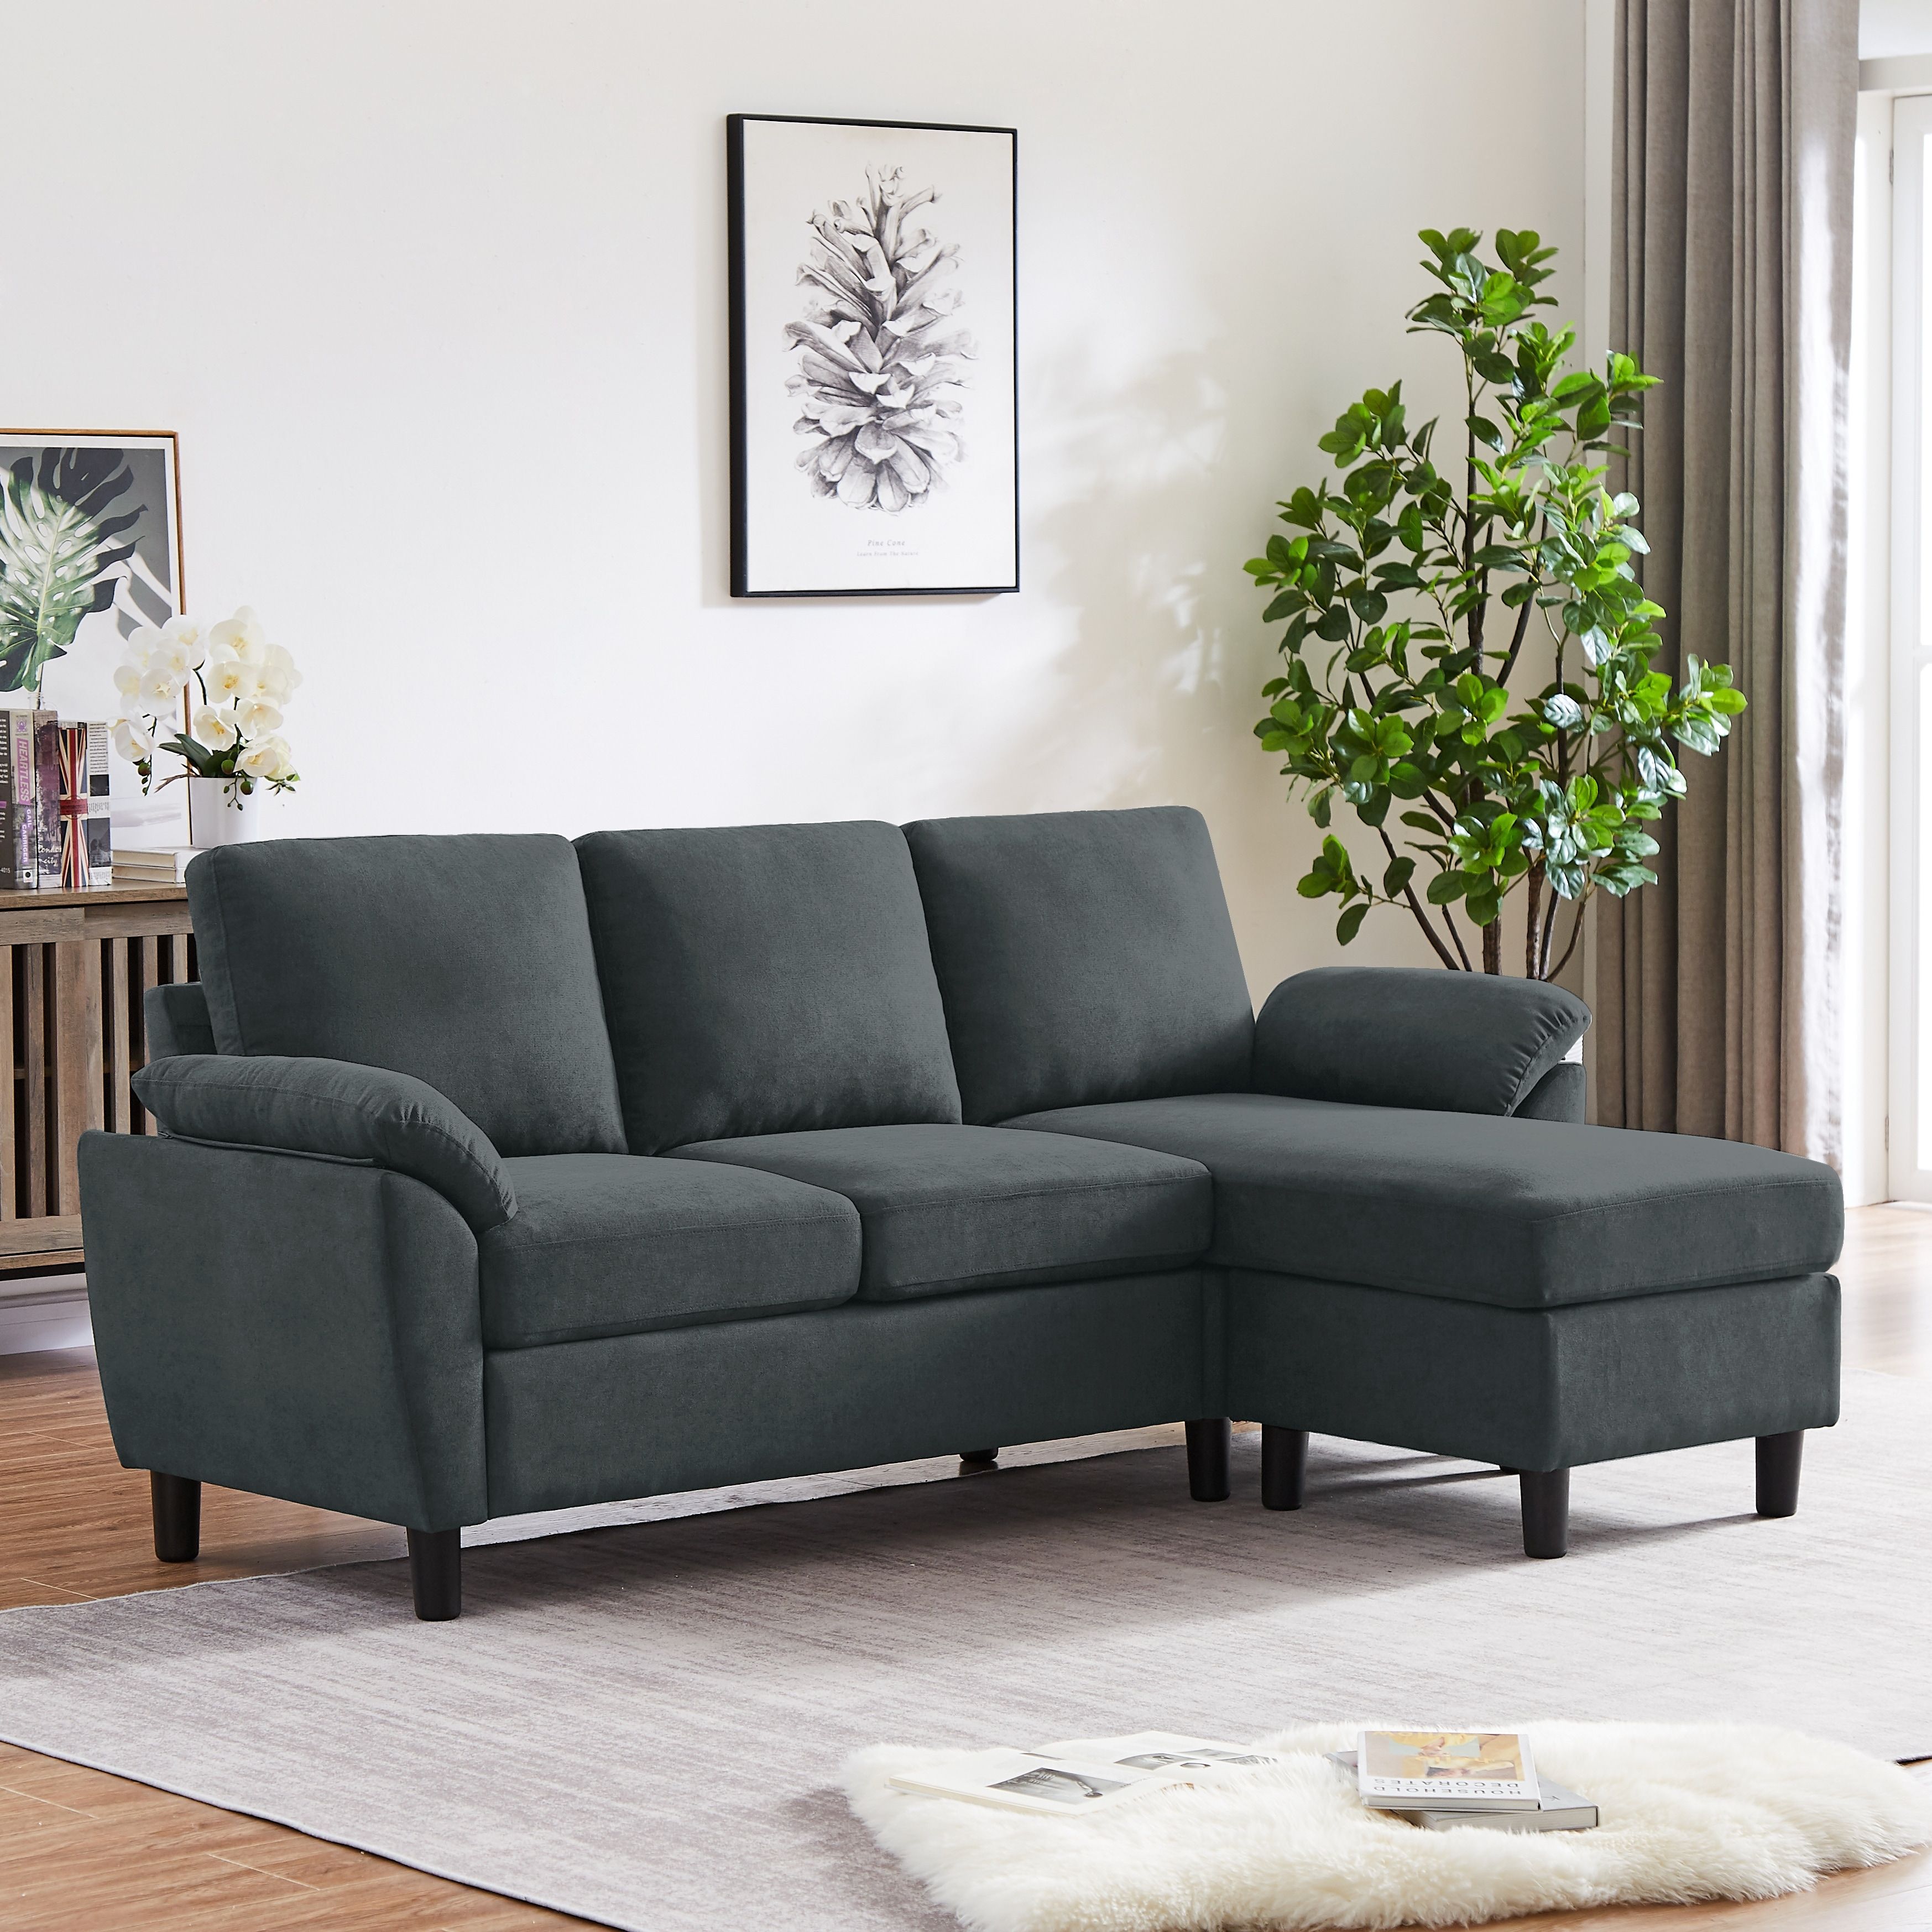 Jarenie Sofa Couch Upholstered L Shape Sectional Sofas Sets For Living Room  – On Sale – – 36756391 Intended For Sectional Couches For Living Room (View 10 of 20)